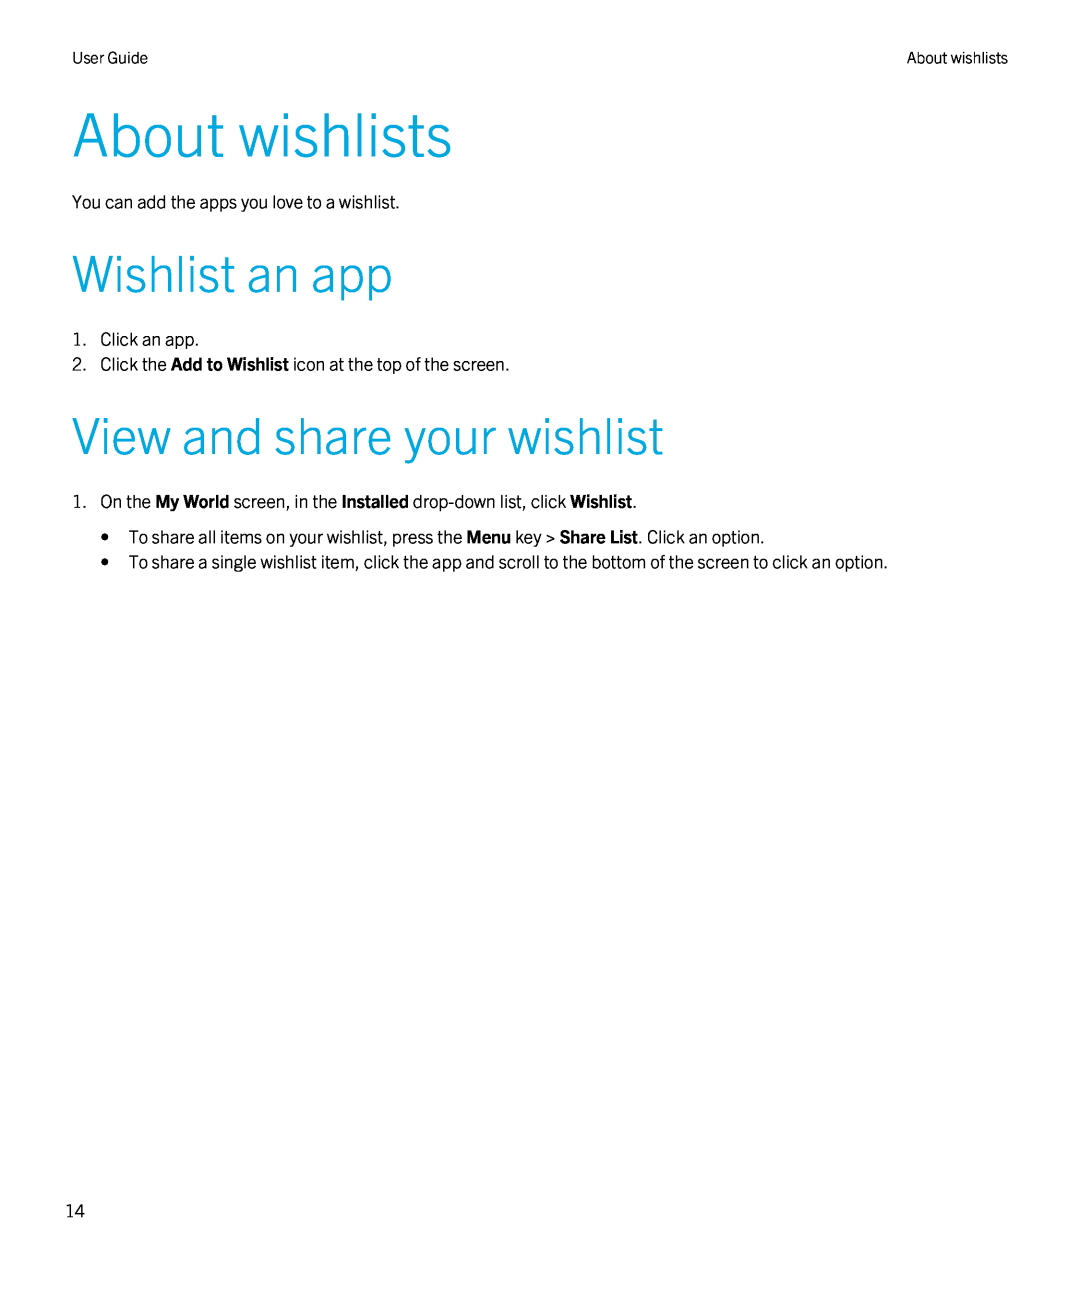 Blackberry 4.3 manual About wishlists, Wishlist an app, View and share your wishlist 